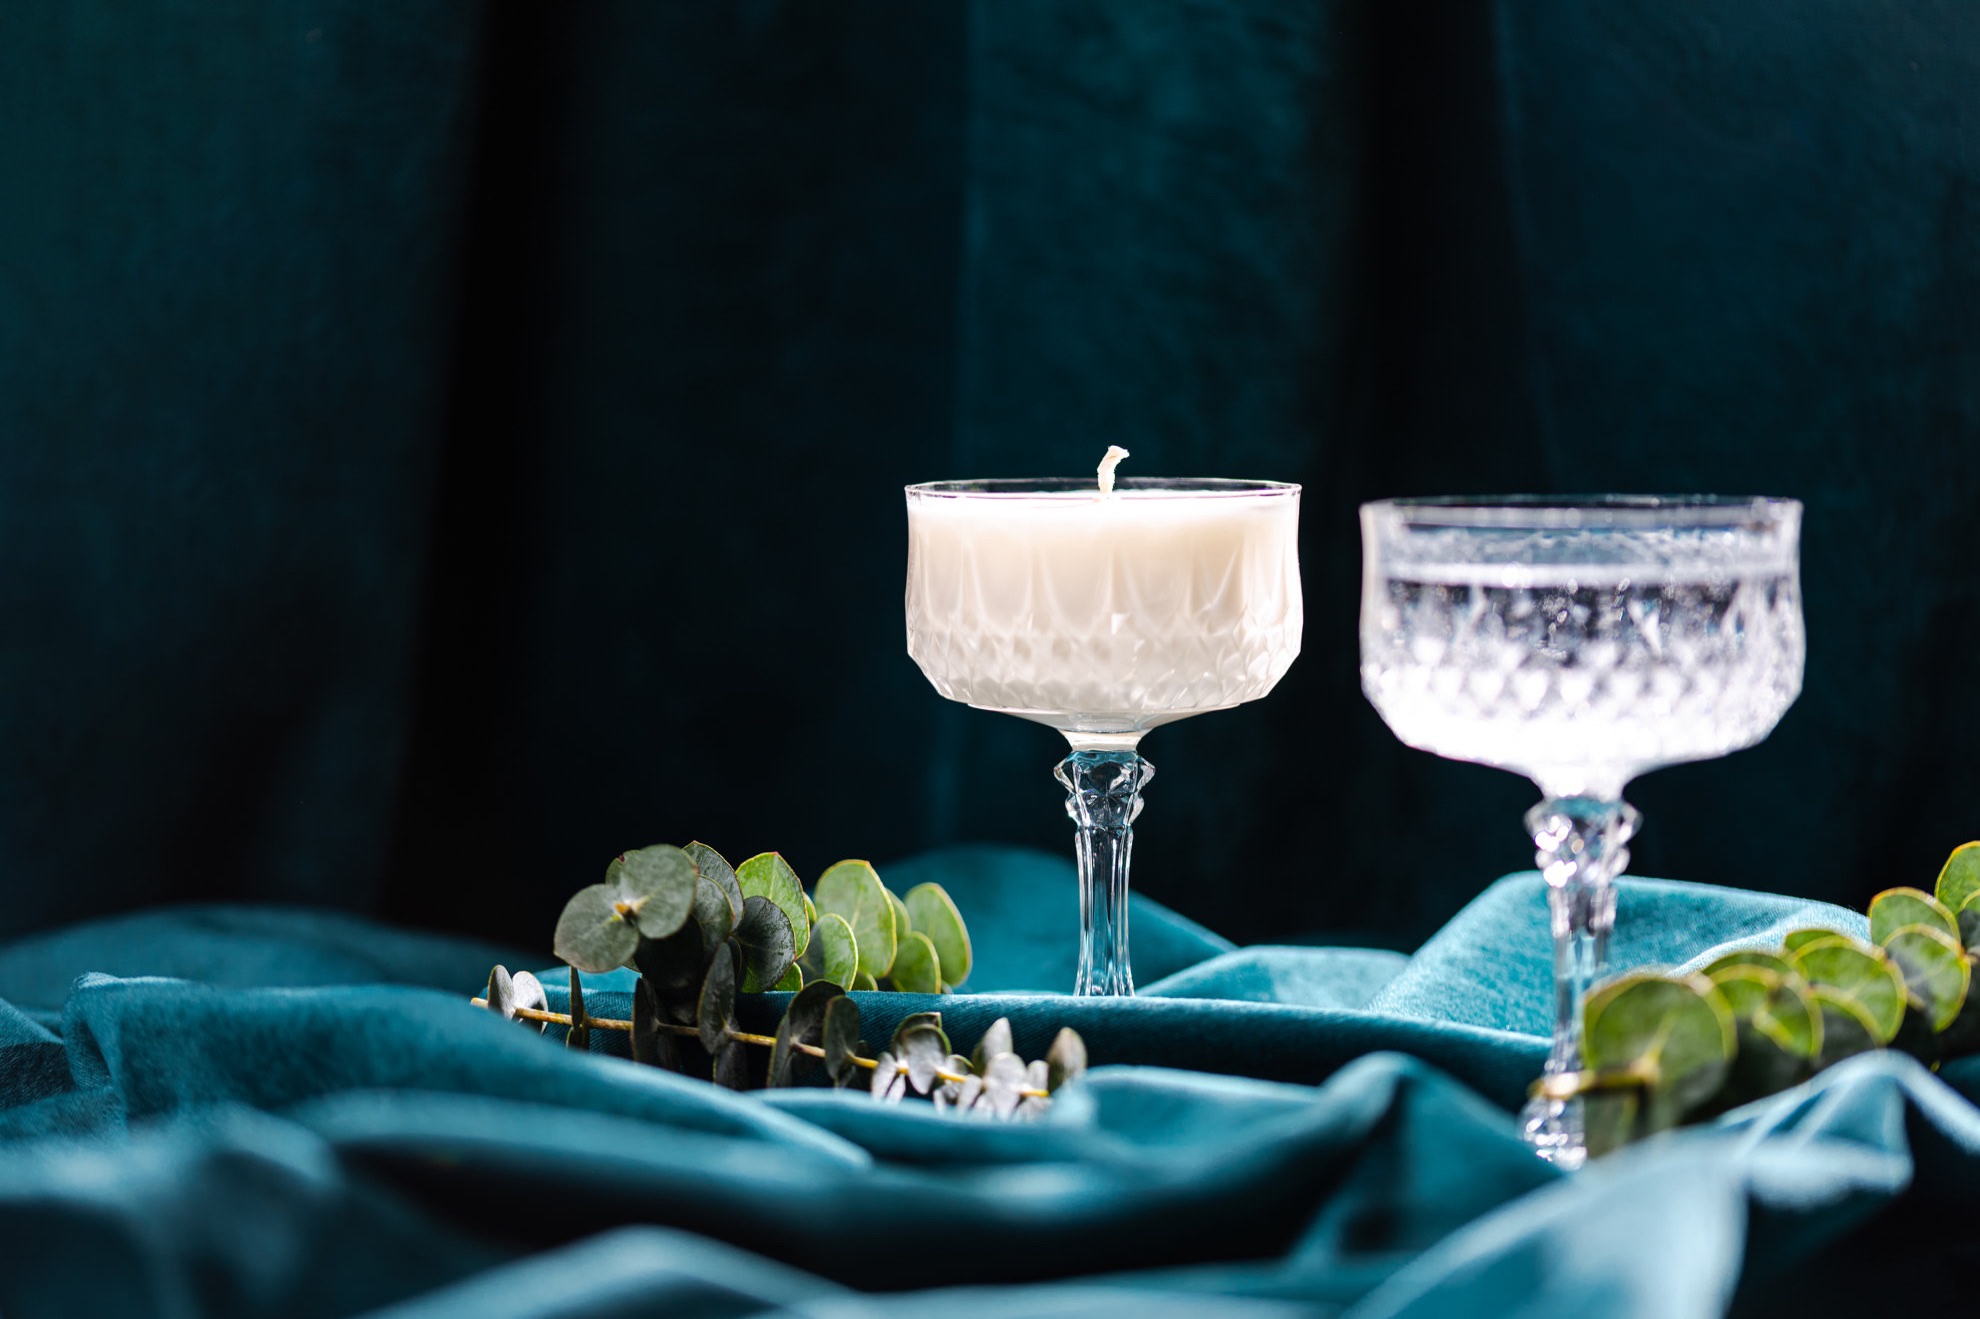 two vintage glasses with a cocktail in one glass and a candle in the other on a dark green velvet background